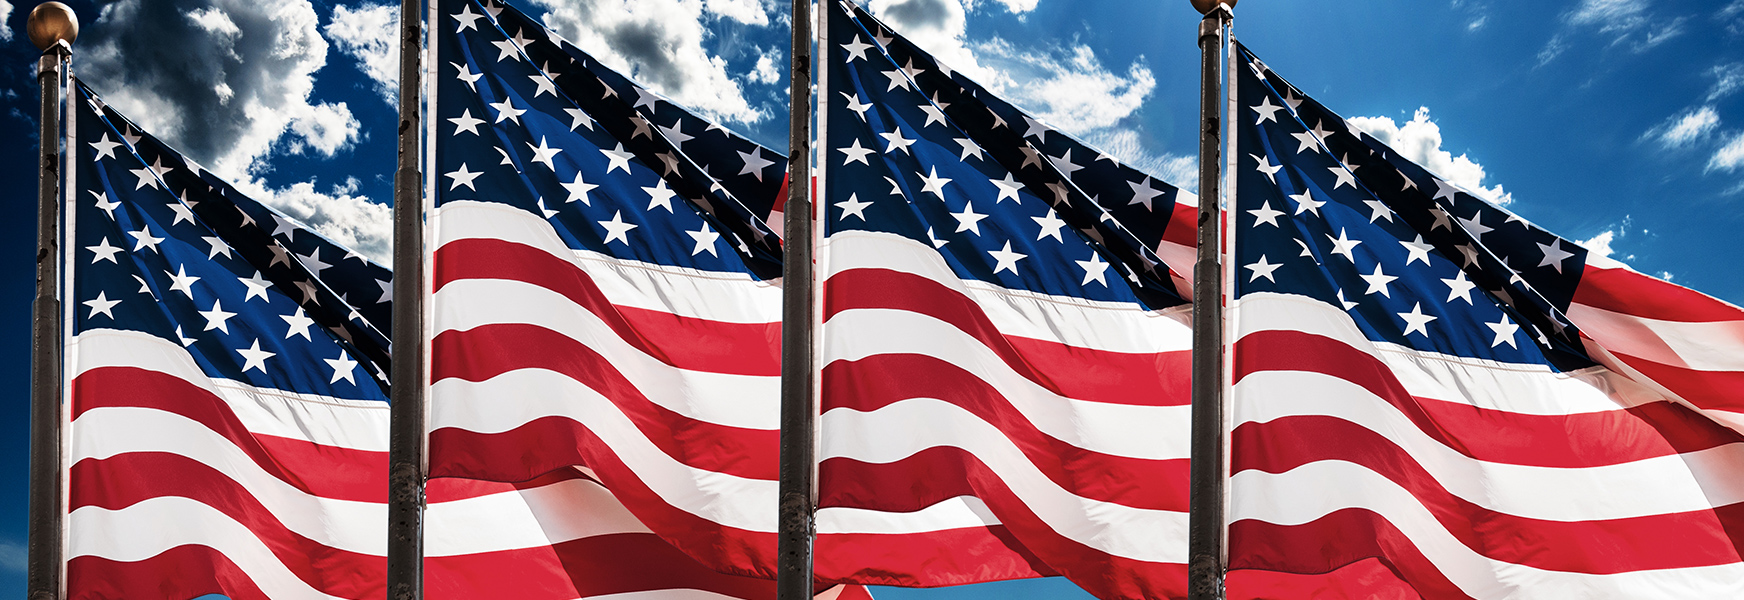 Four american flags blowing in the wind against a summer blue sky background